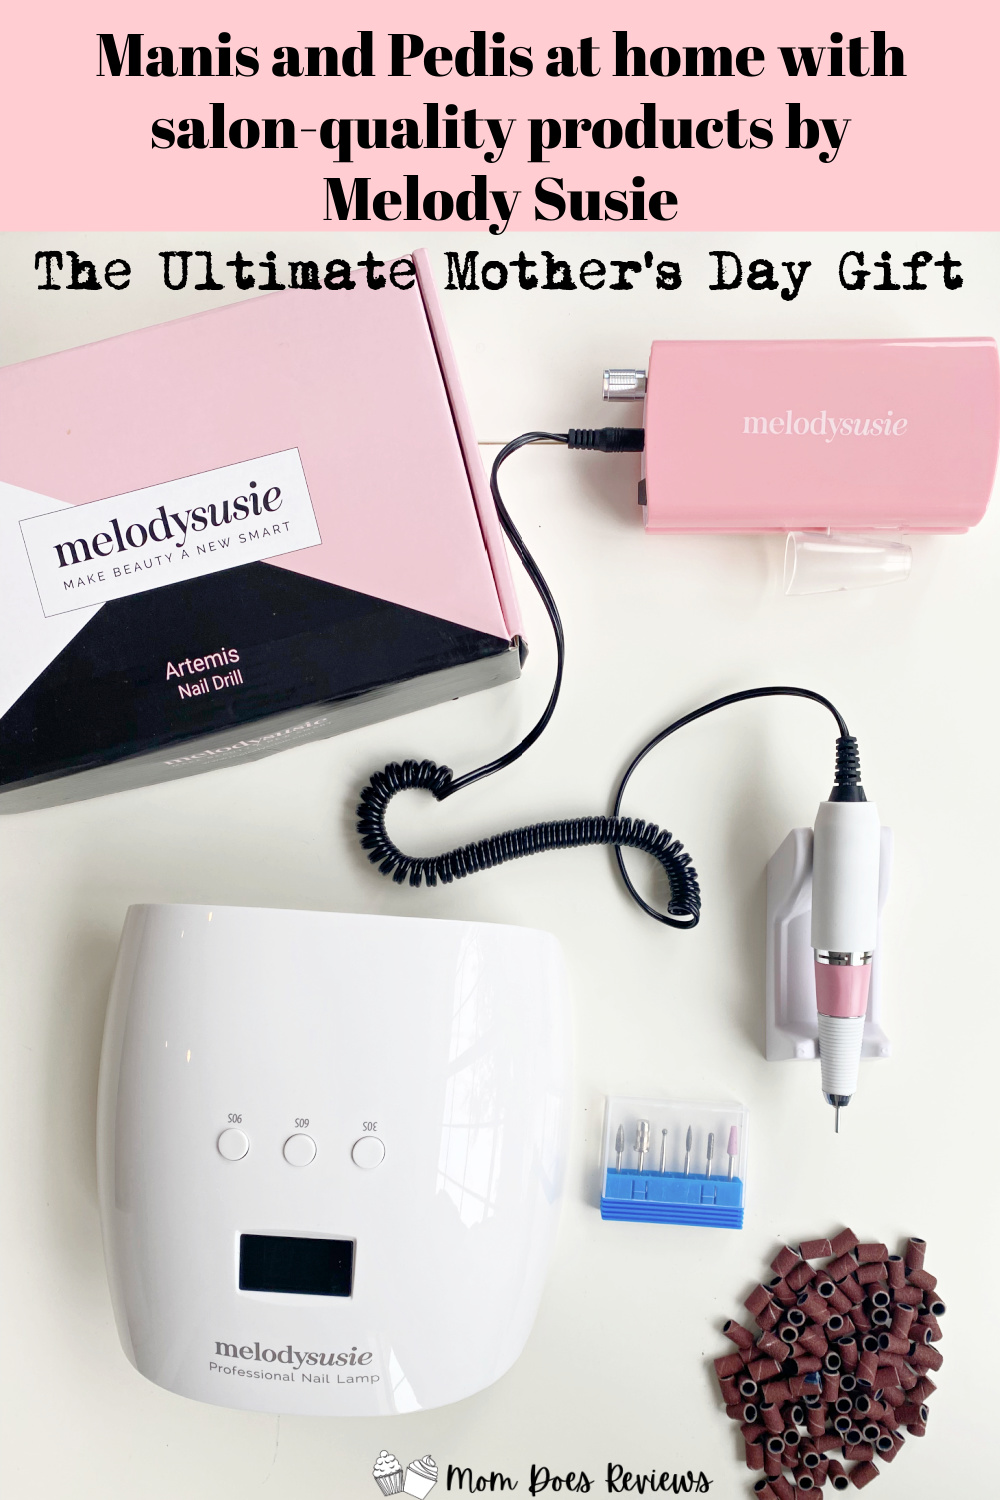 Manis and Pedis at home with salon-quality products by Melody Susie. The ultimate Mother's Day gifts